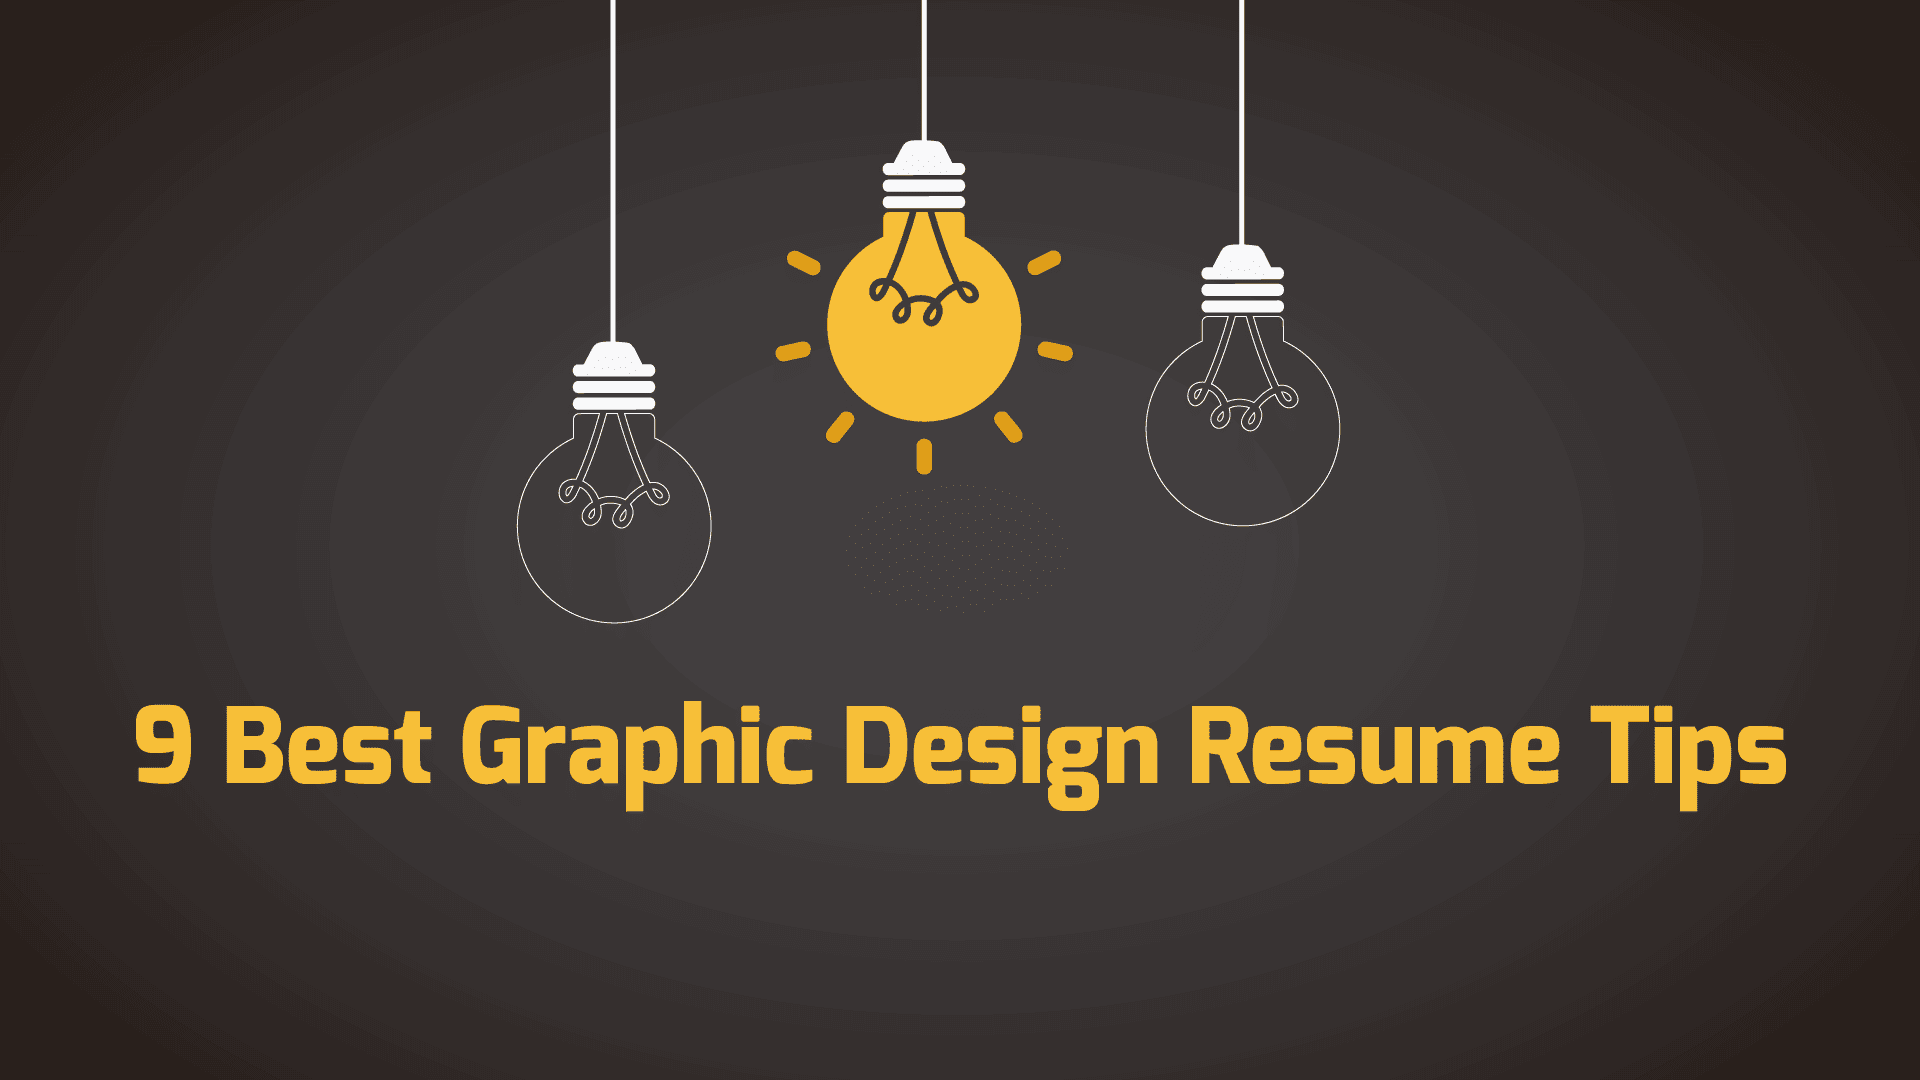 How to create a stellar graphic design resume